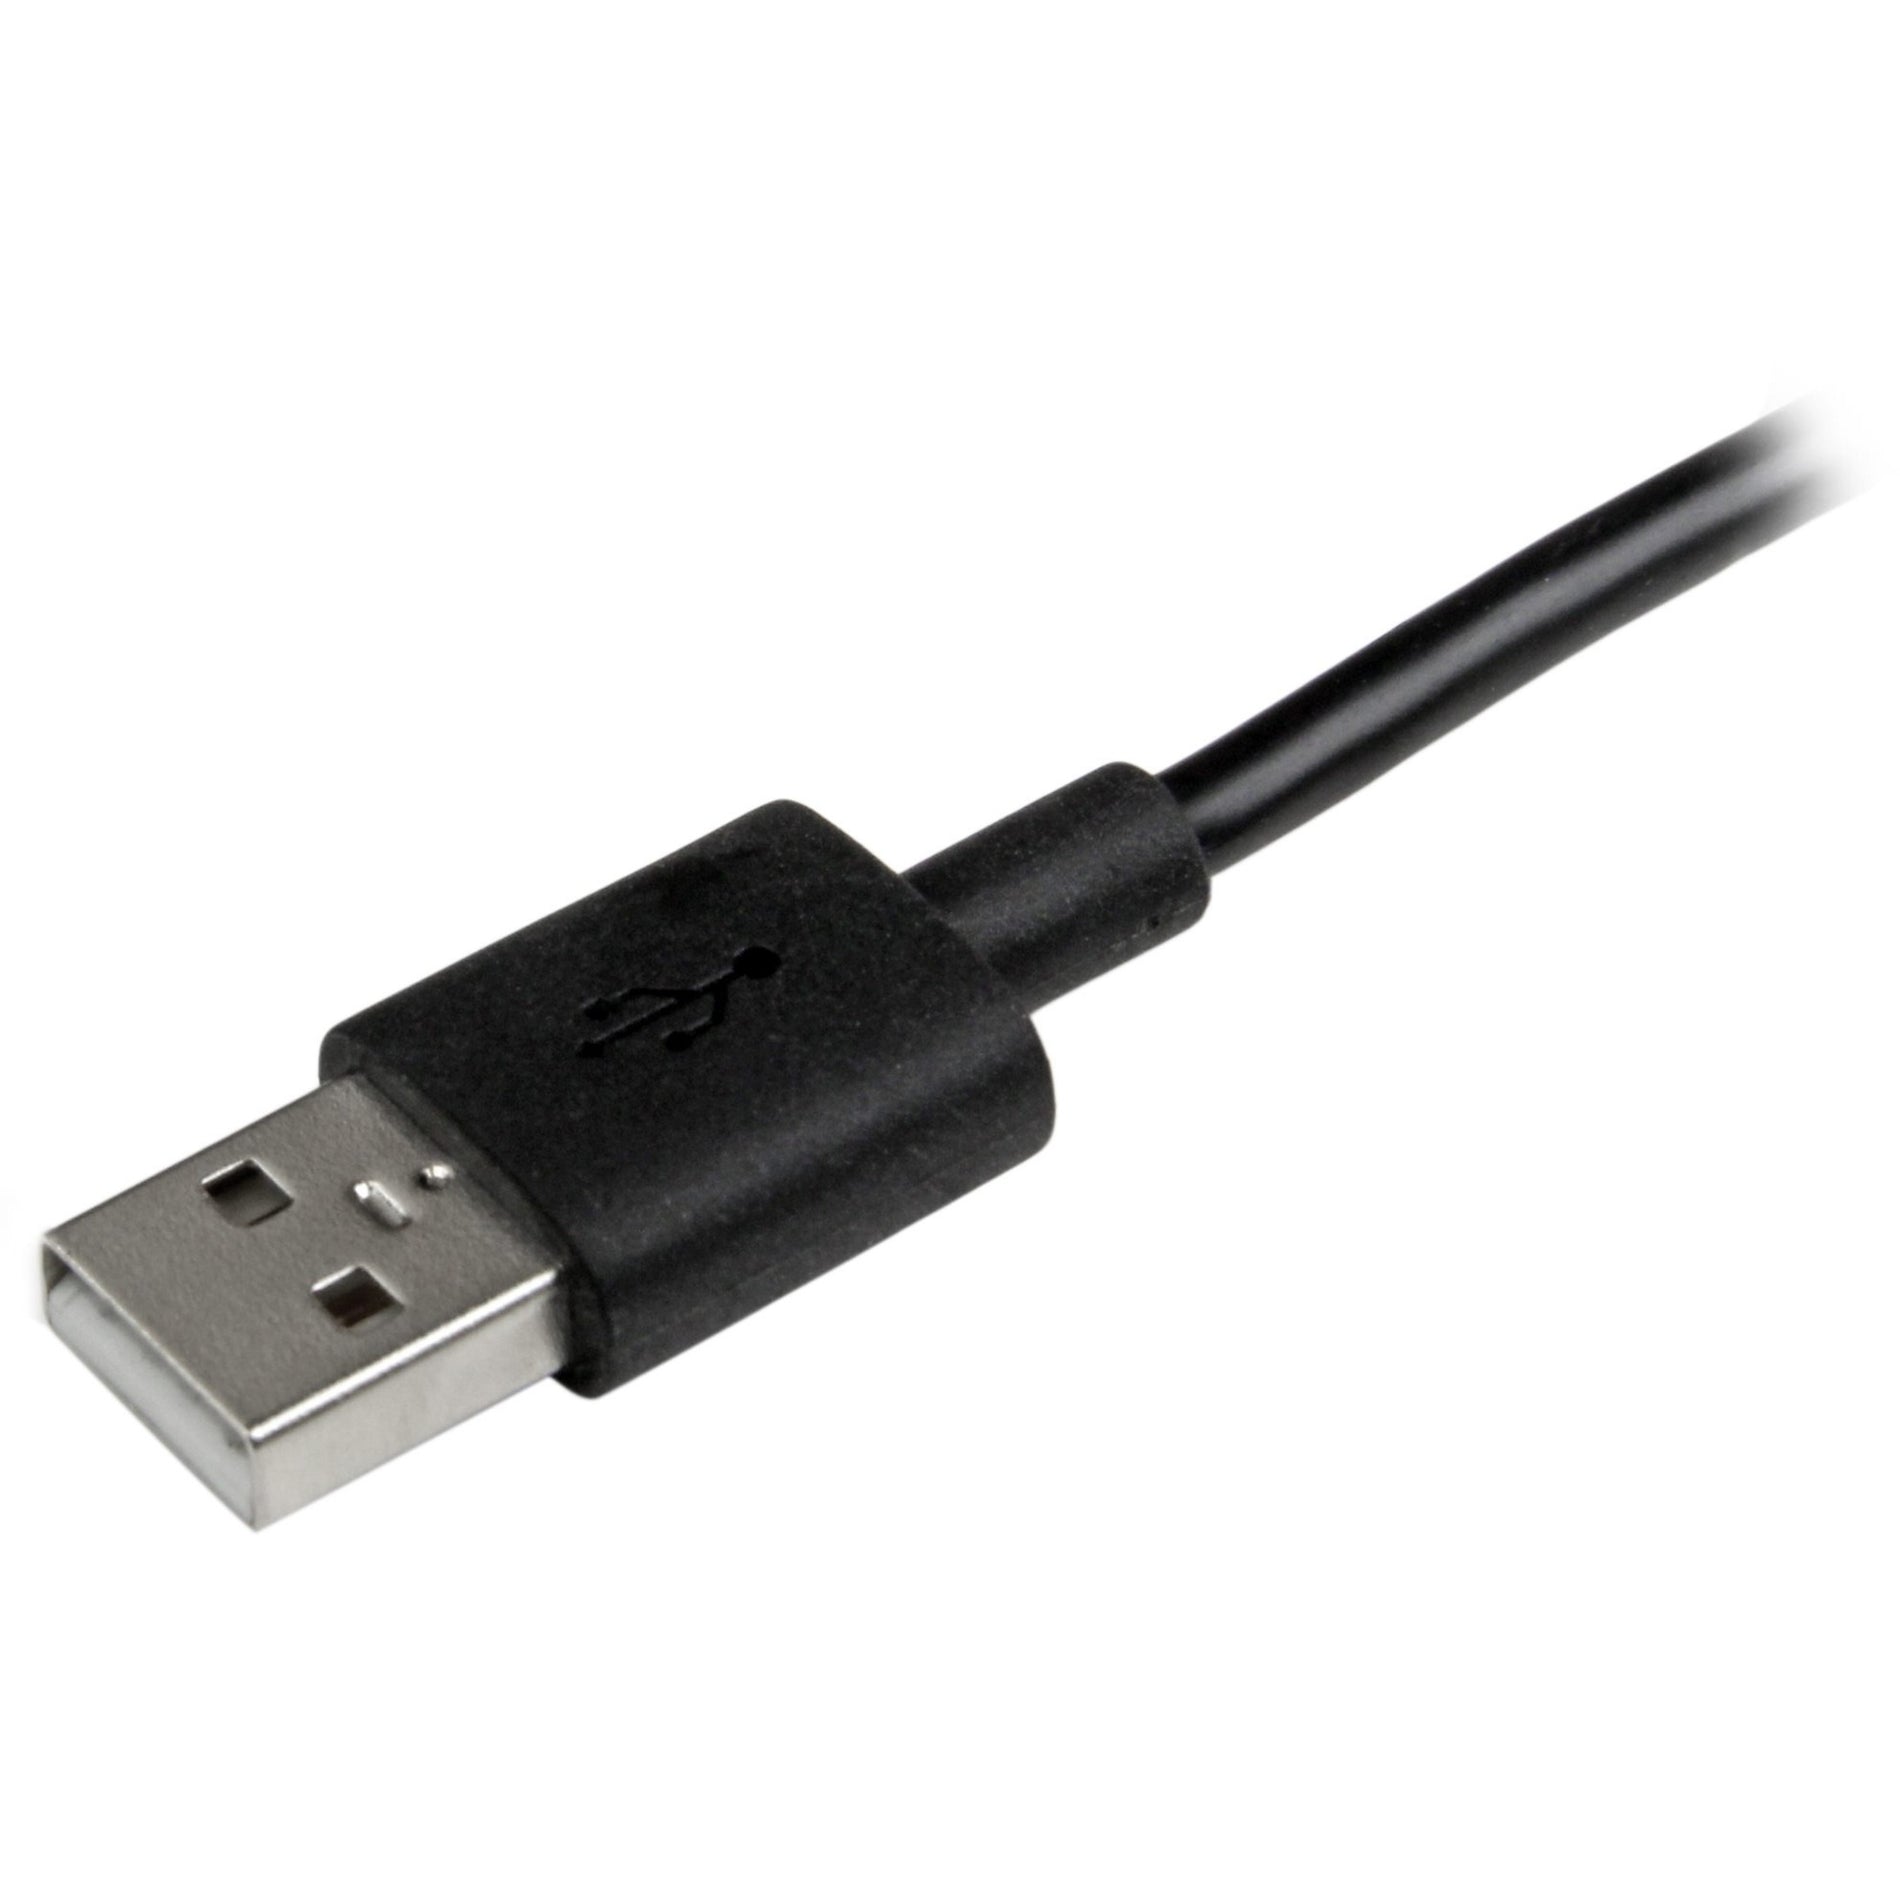 StarTech.com LTUB1MBK Lightning or Micro USB to USB Cable 1m (3ft), Black, for iPhone / iPod / iPad